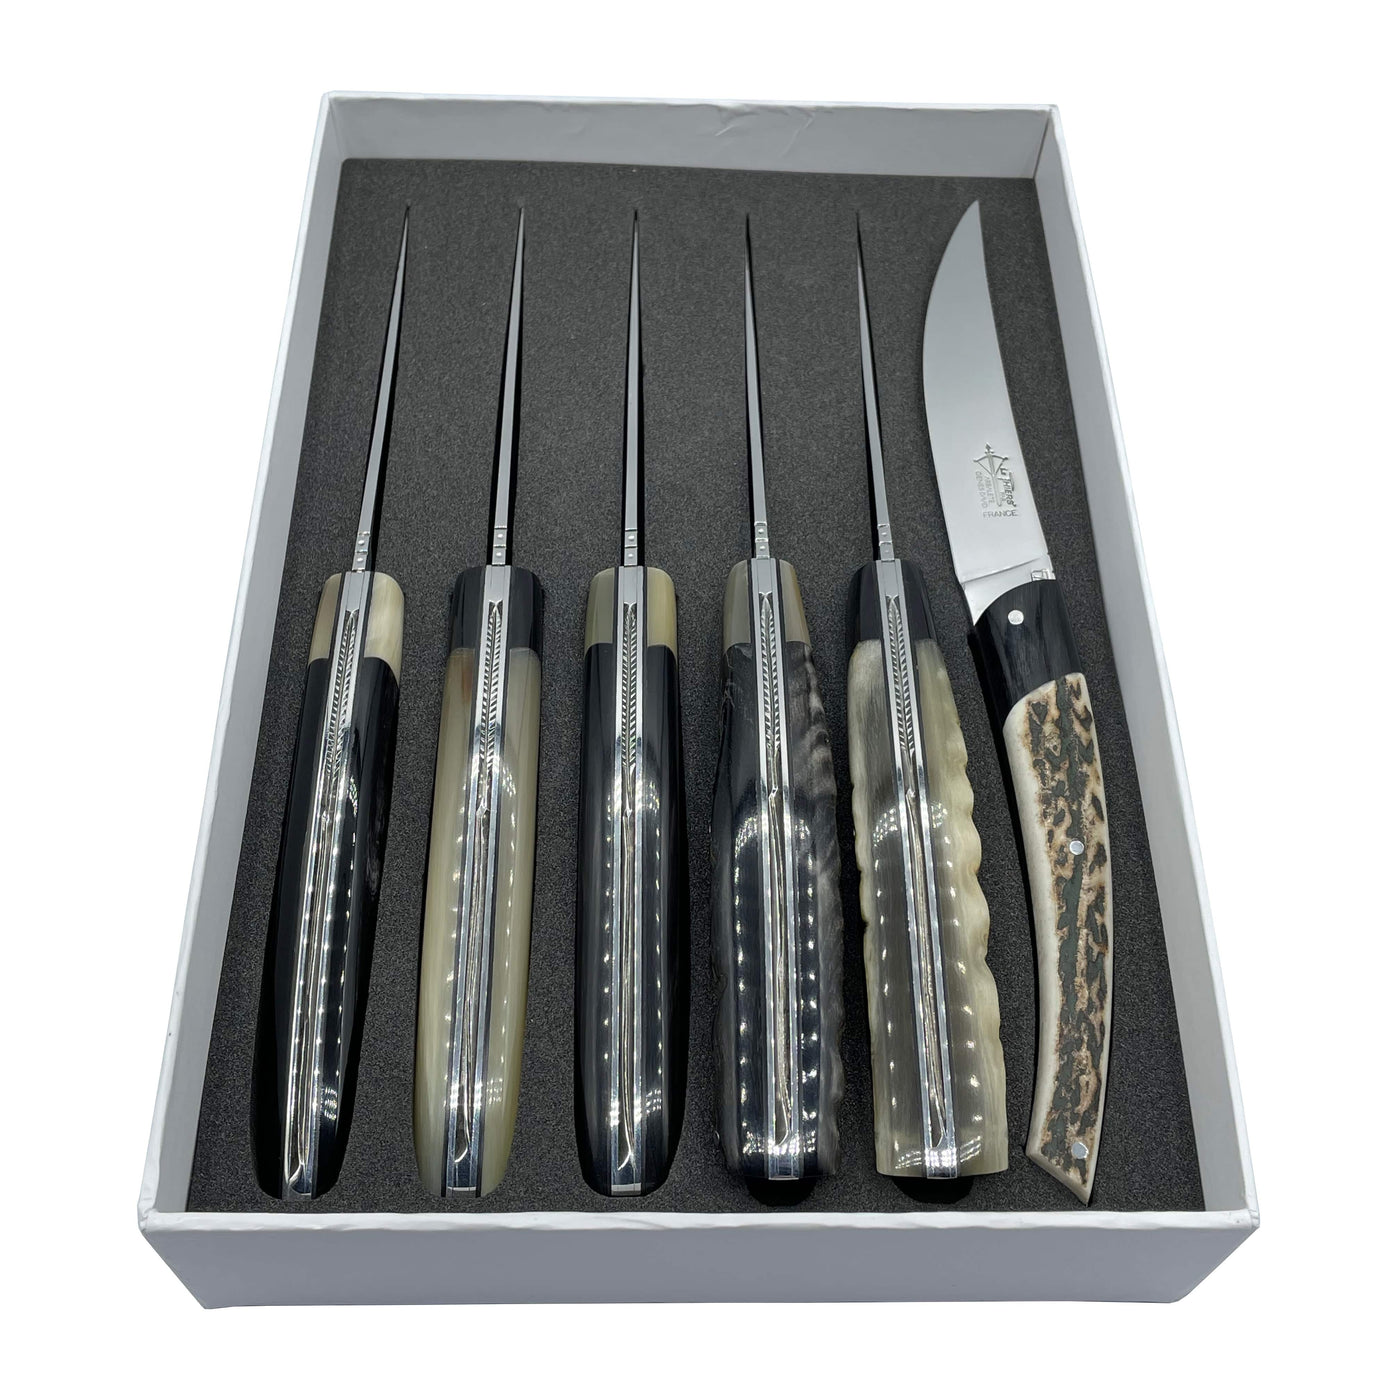 Arbalete Genes David Luxury Fully Forged Steak Knives 6-Piece Set With Full Combined Mixed Horn Handles & Bolsters, 4.25-Inches - Kitchen Universe